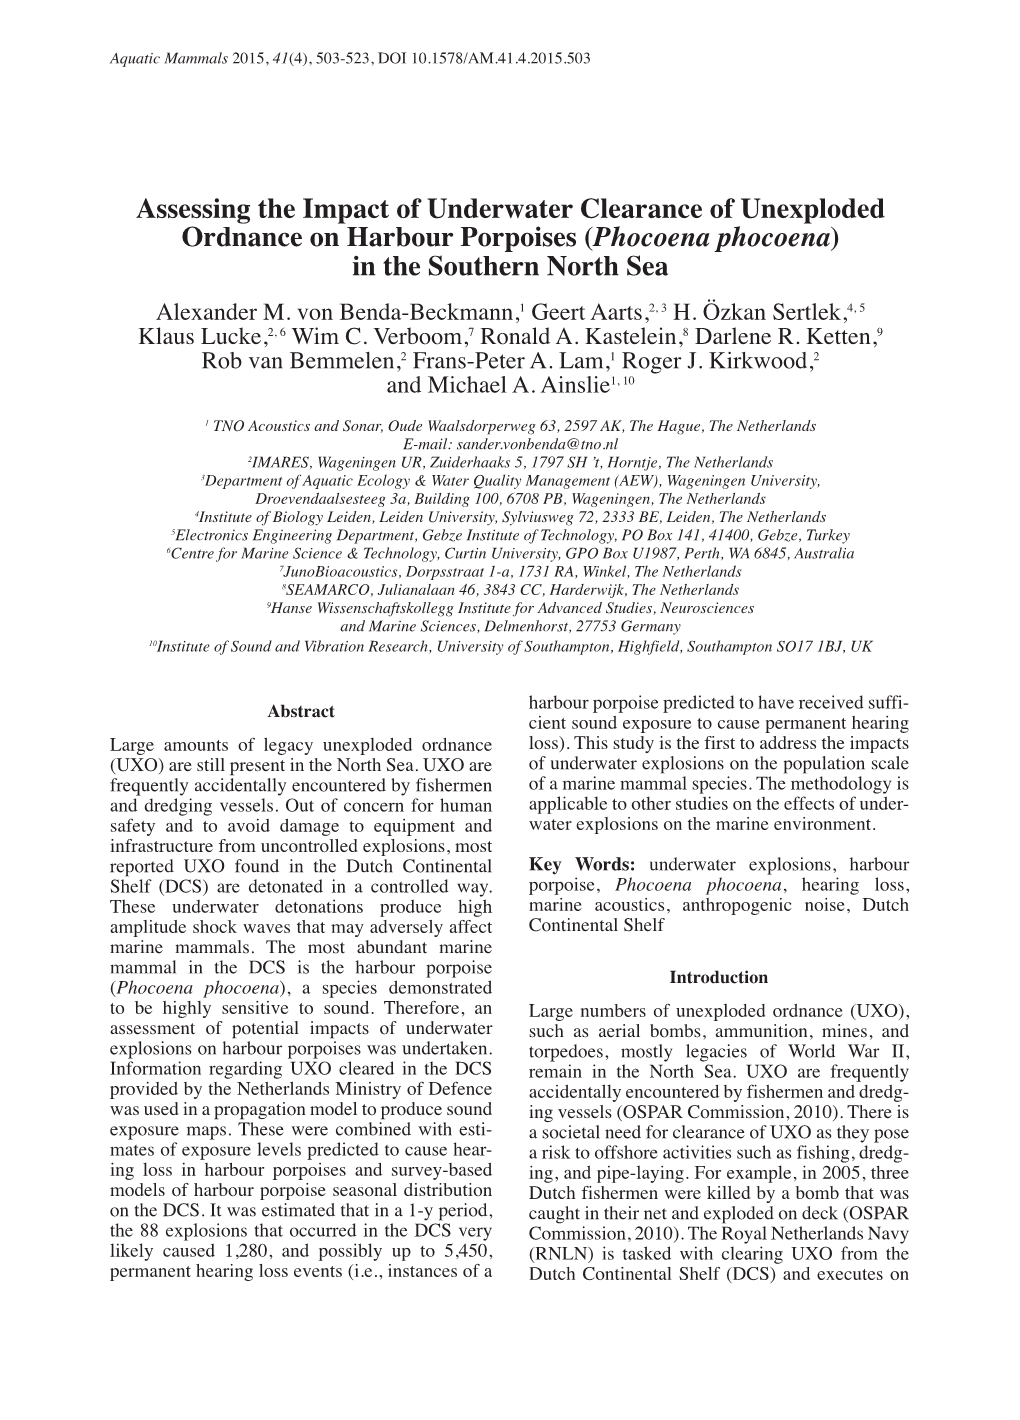 Assessing the Impact of Underwater Clearance of Unexploded Ordnance on Harbour Porpoises (Phocoena Phocoena) in the Southern North Sea Alexander M